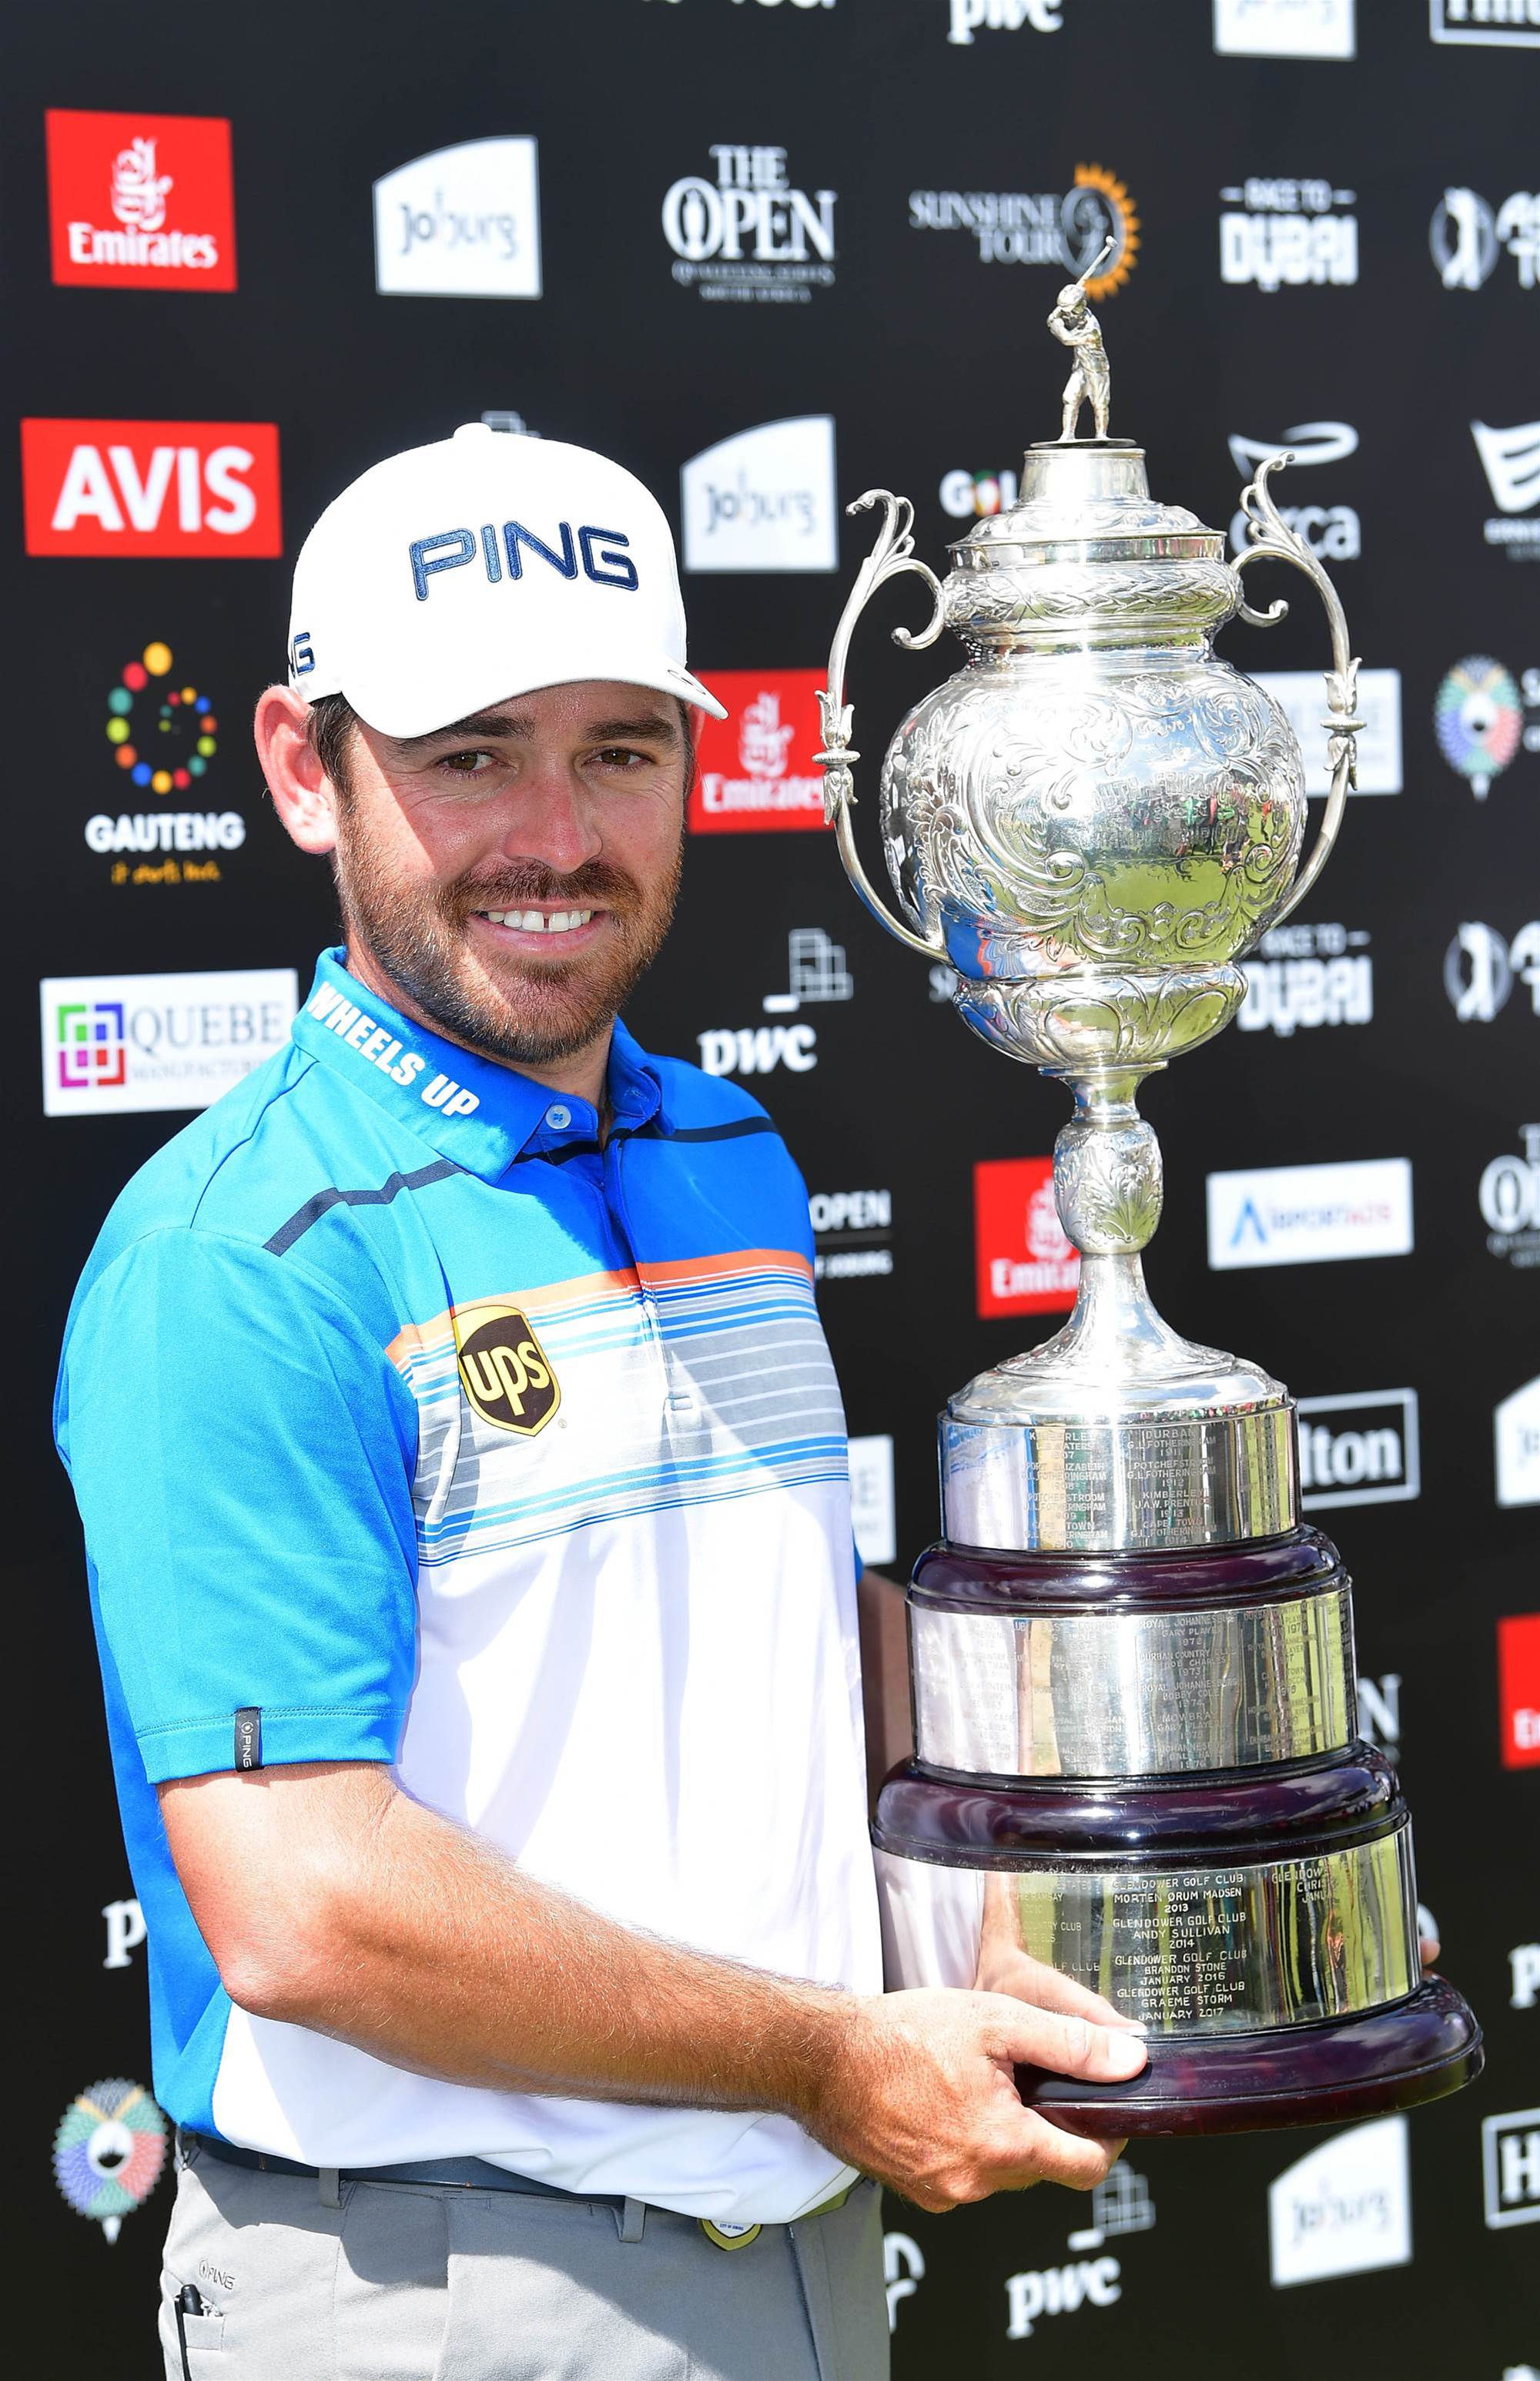 The Preview South African Open hosted by the City of Johannesburg